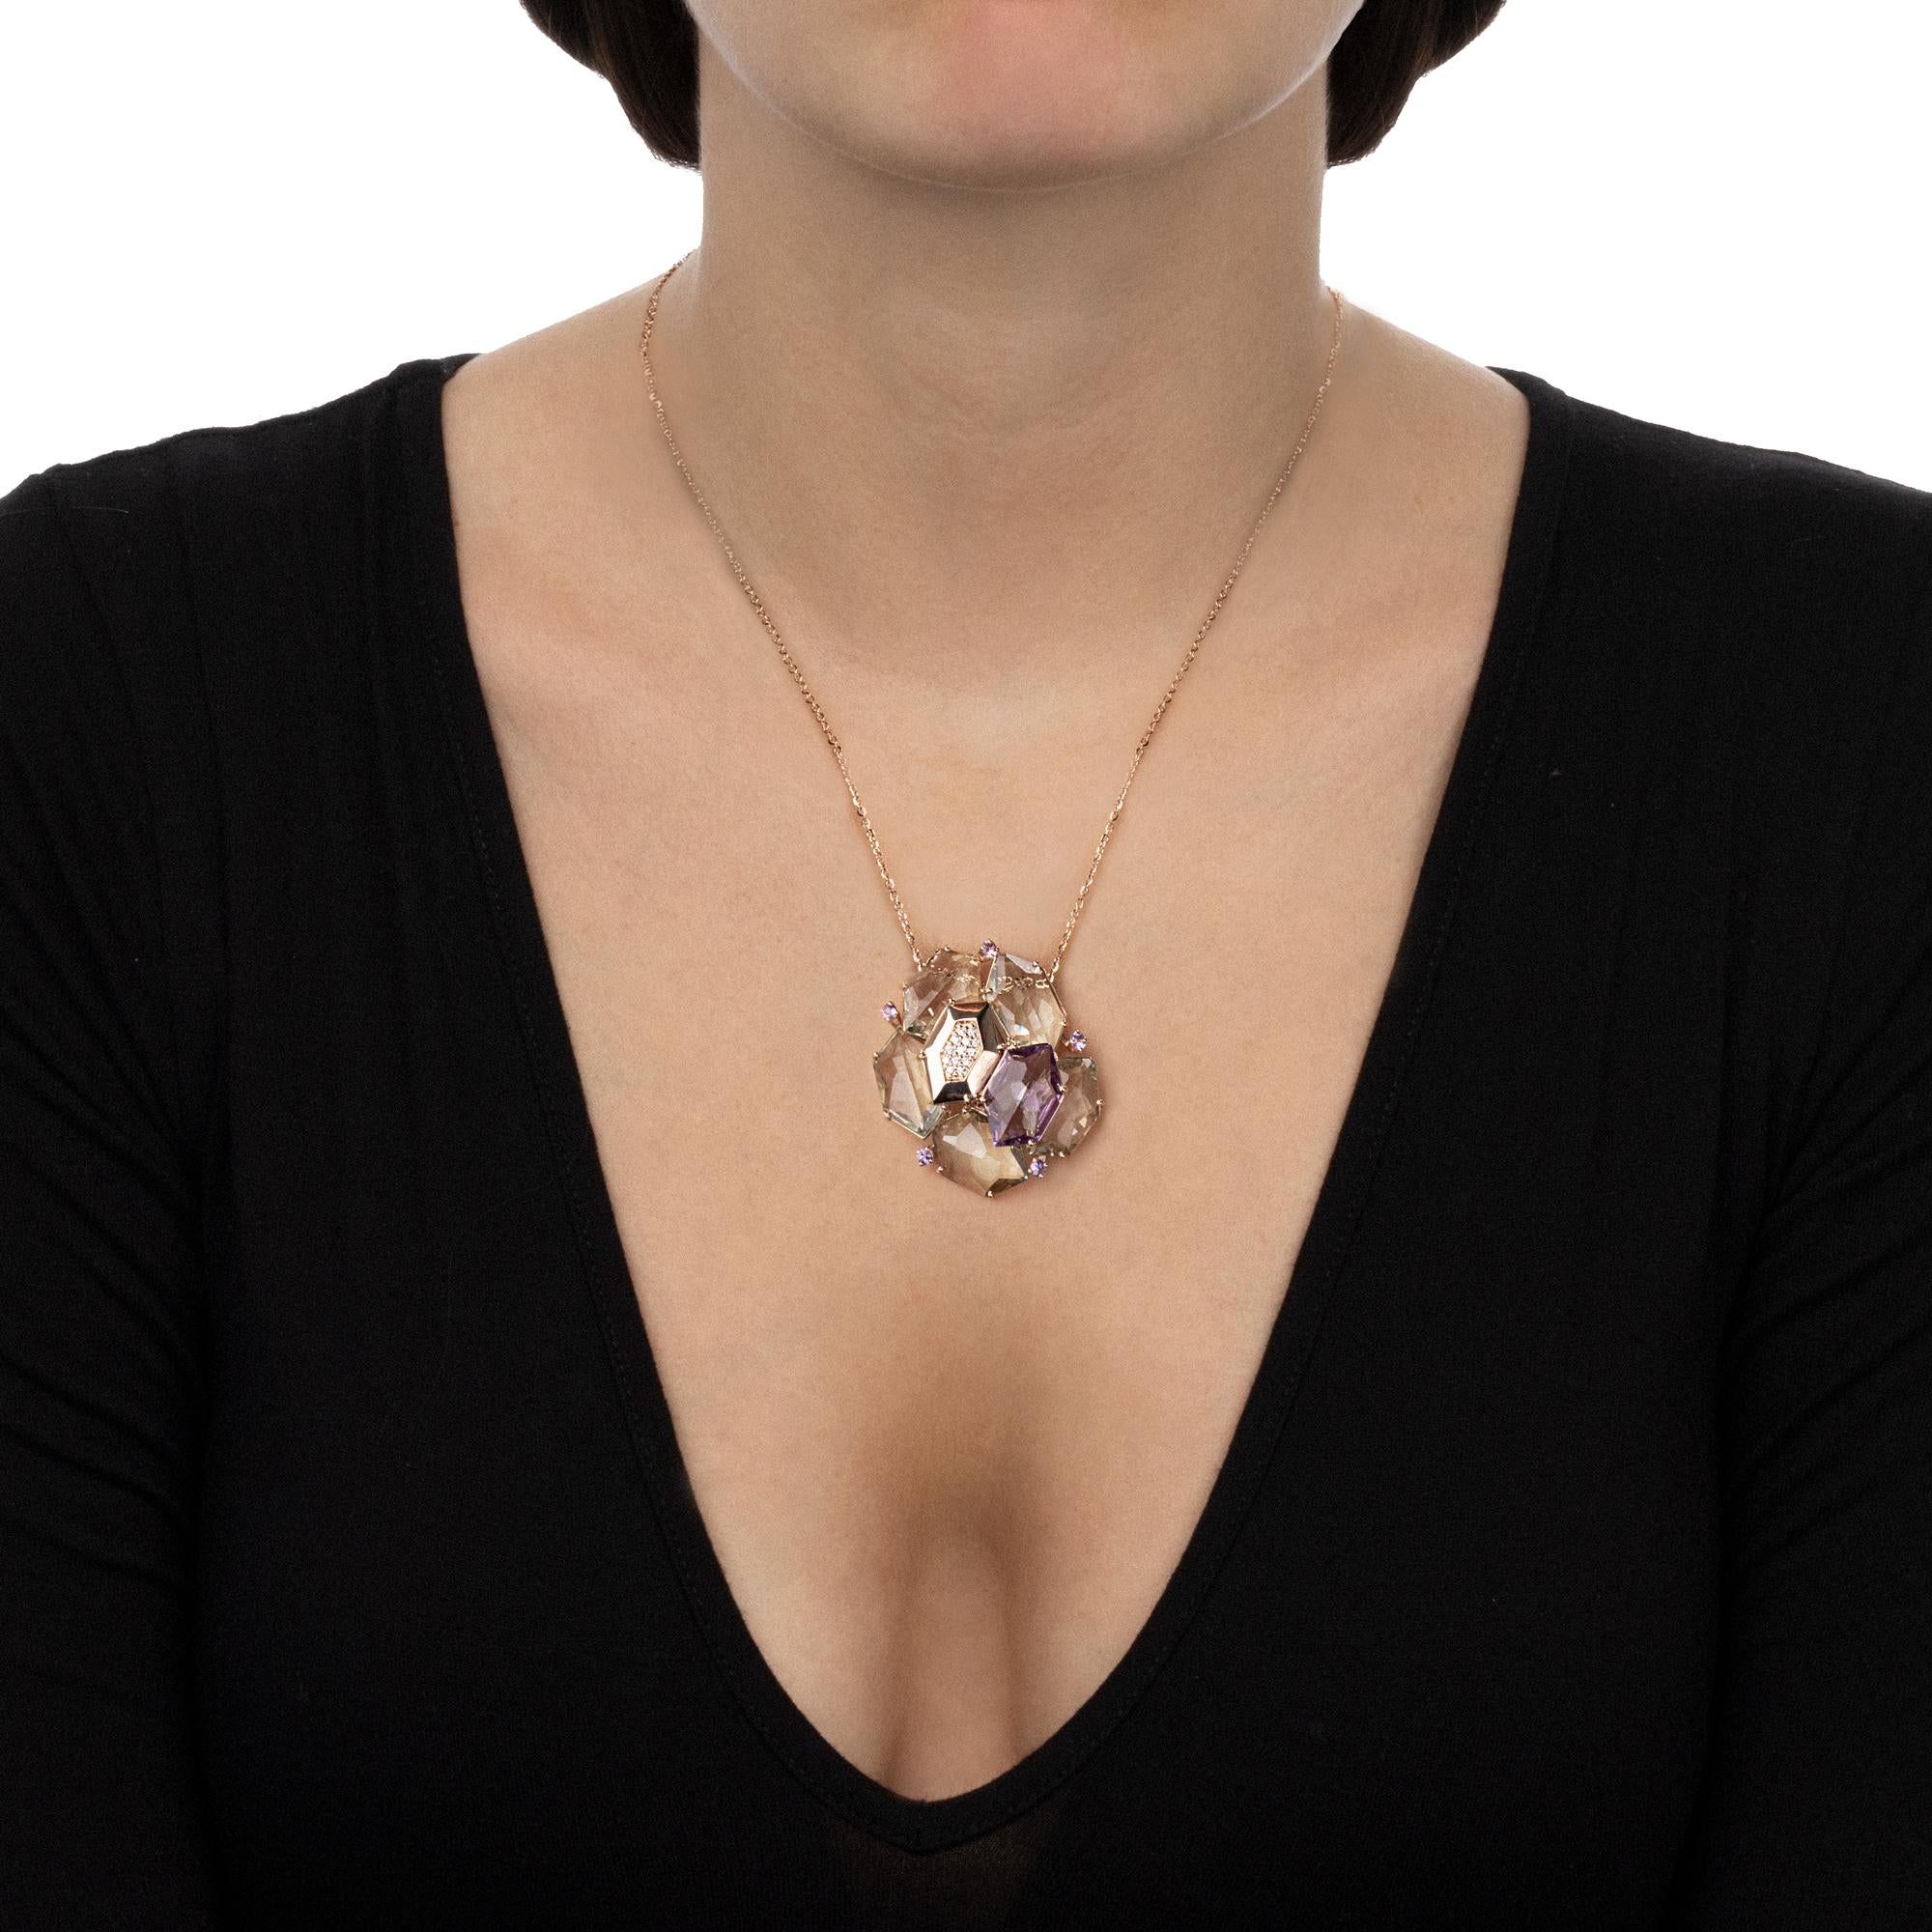 This necklace is an handmade contemporary jewellery piece with a modern design that is bold and sophisticated at the same time. The distinctive asymmetrical setting of the pendant lets the gemstones sparkle bright, drawing the light around your